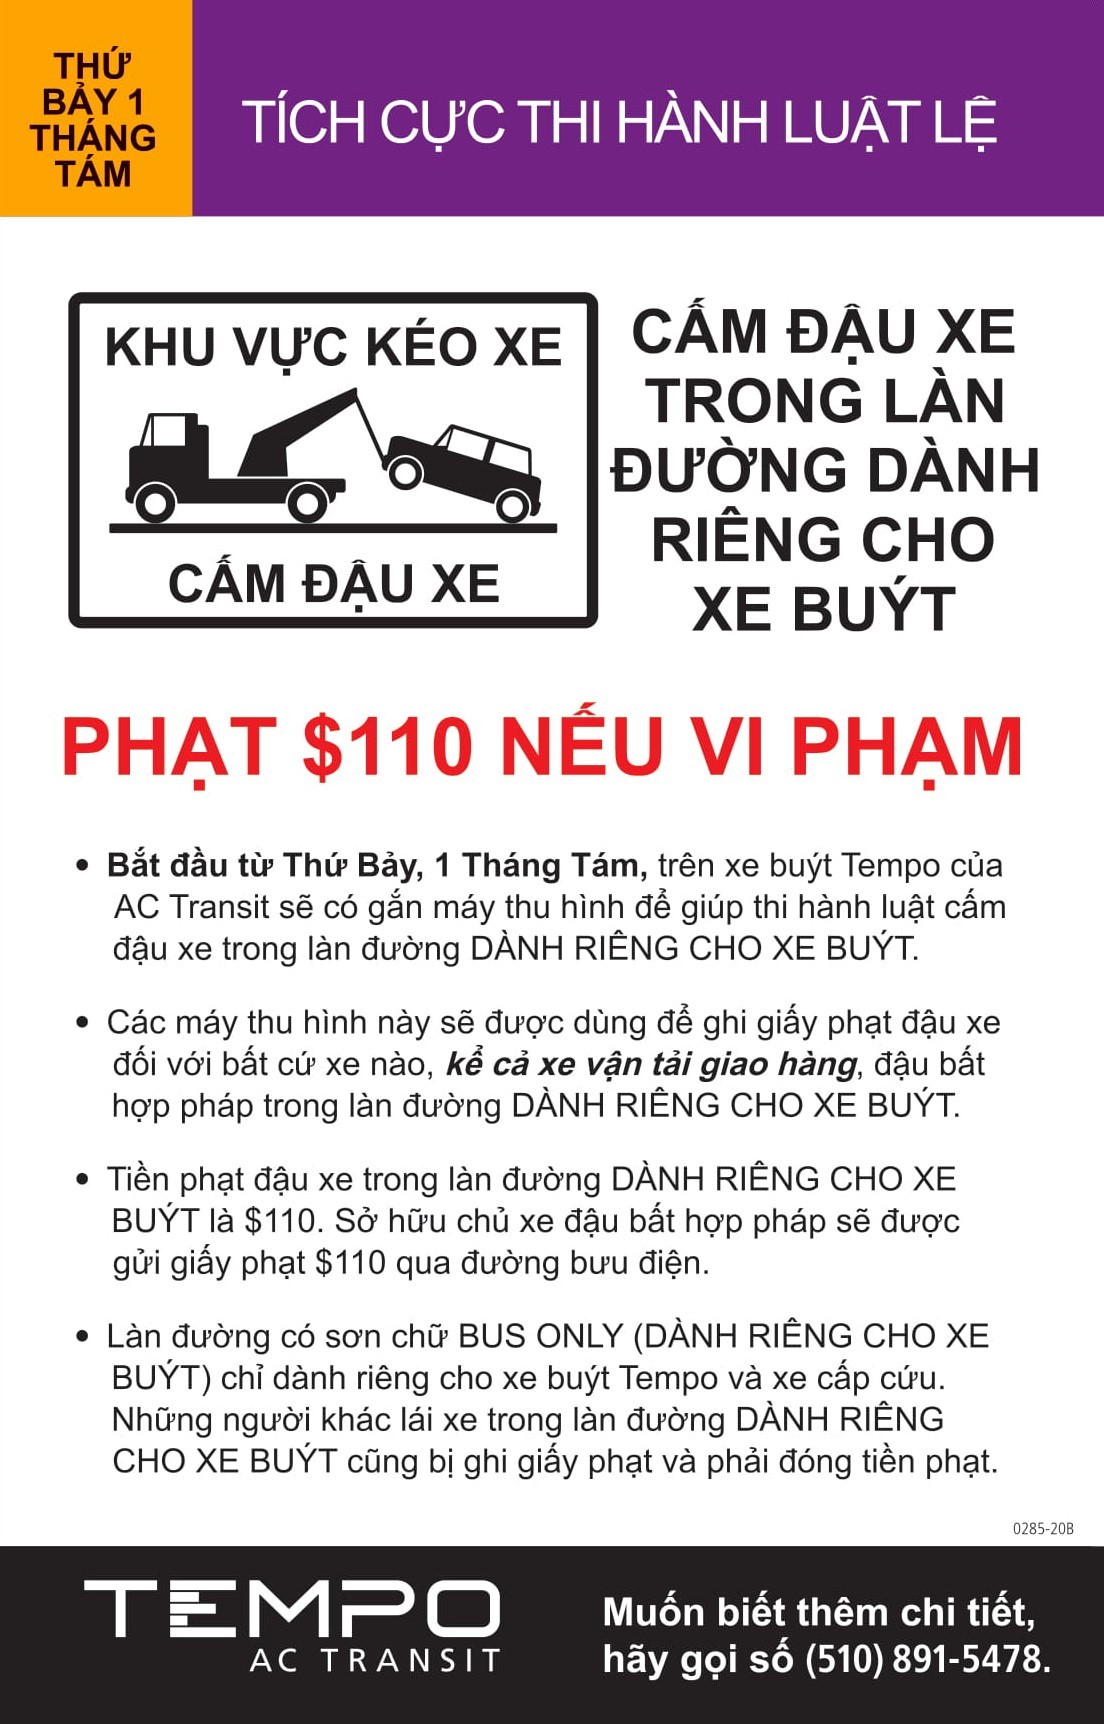 AC Transit notice about enforcement of the bus only lanes in Vietnamese